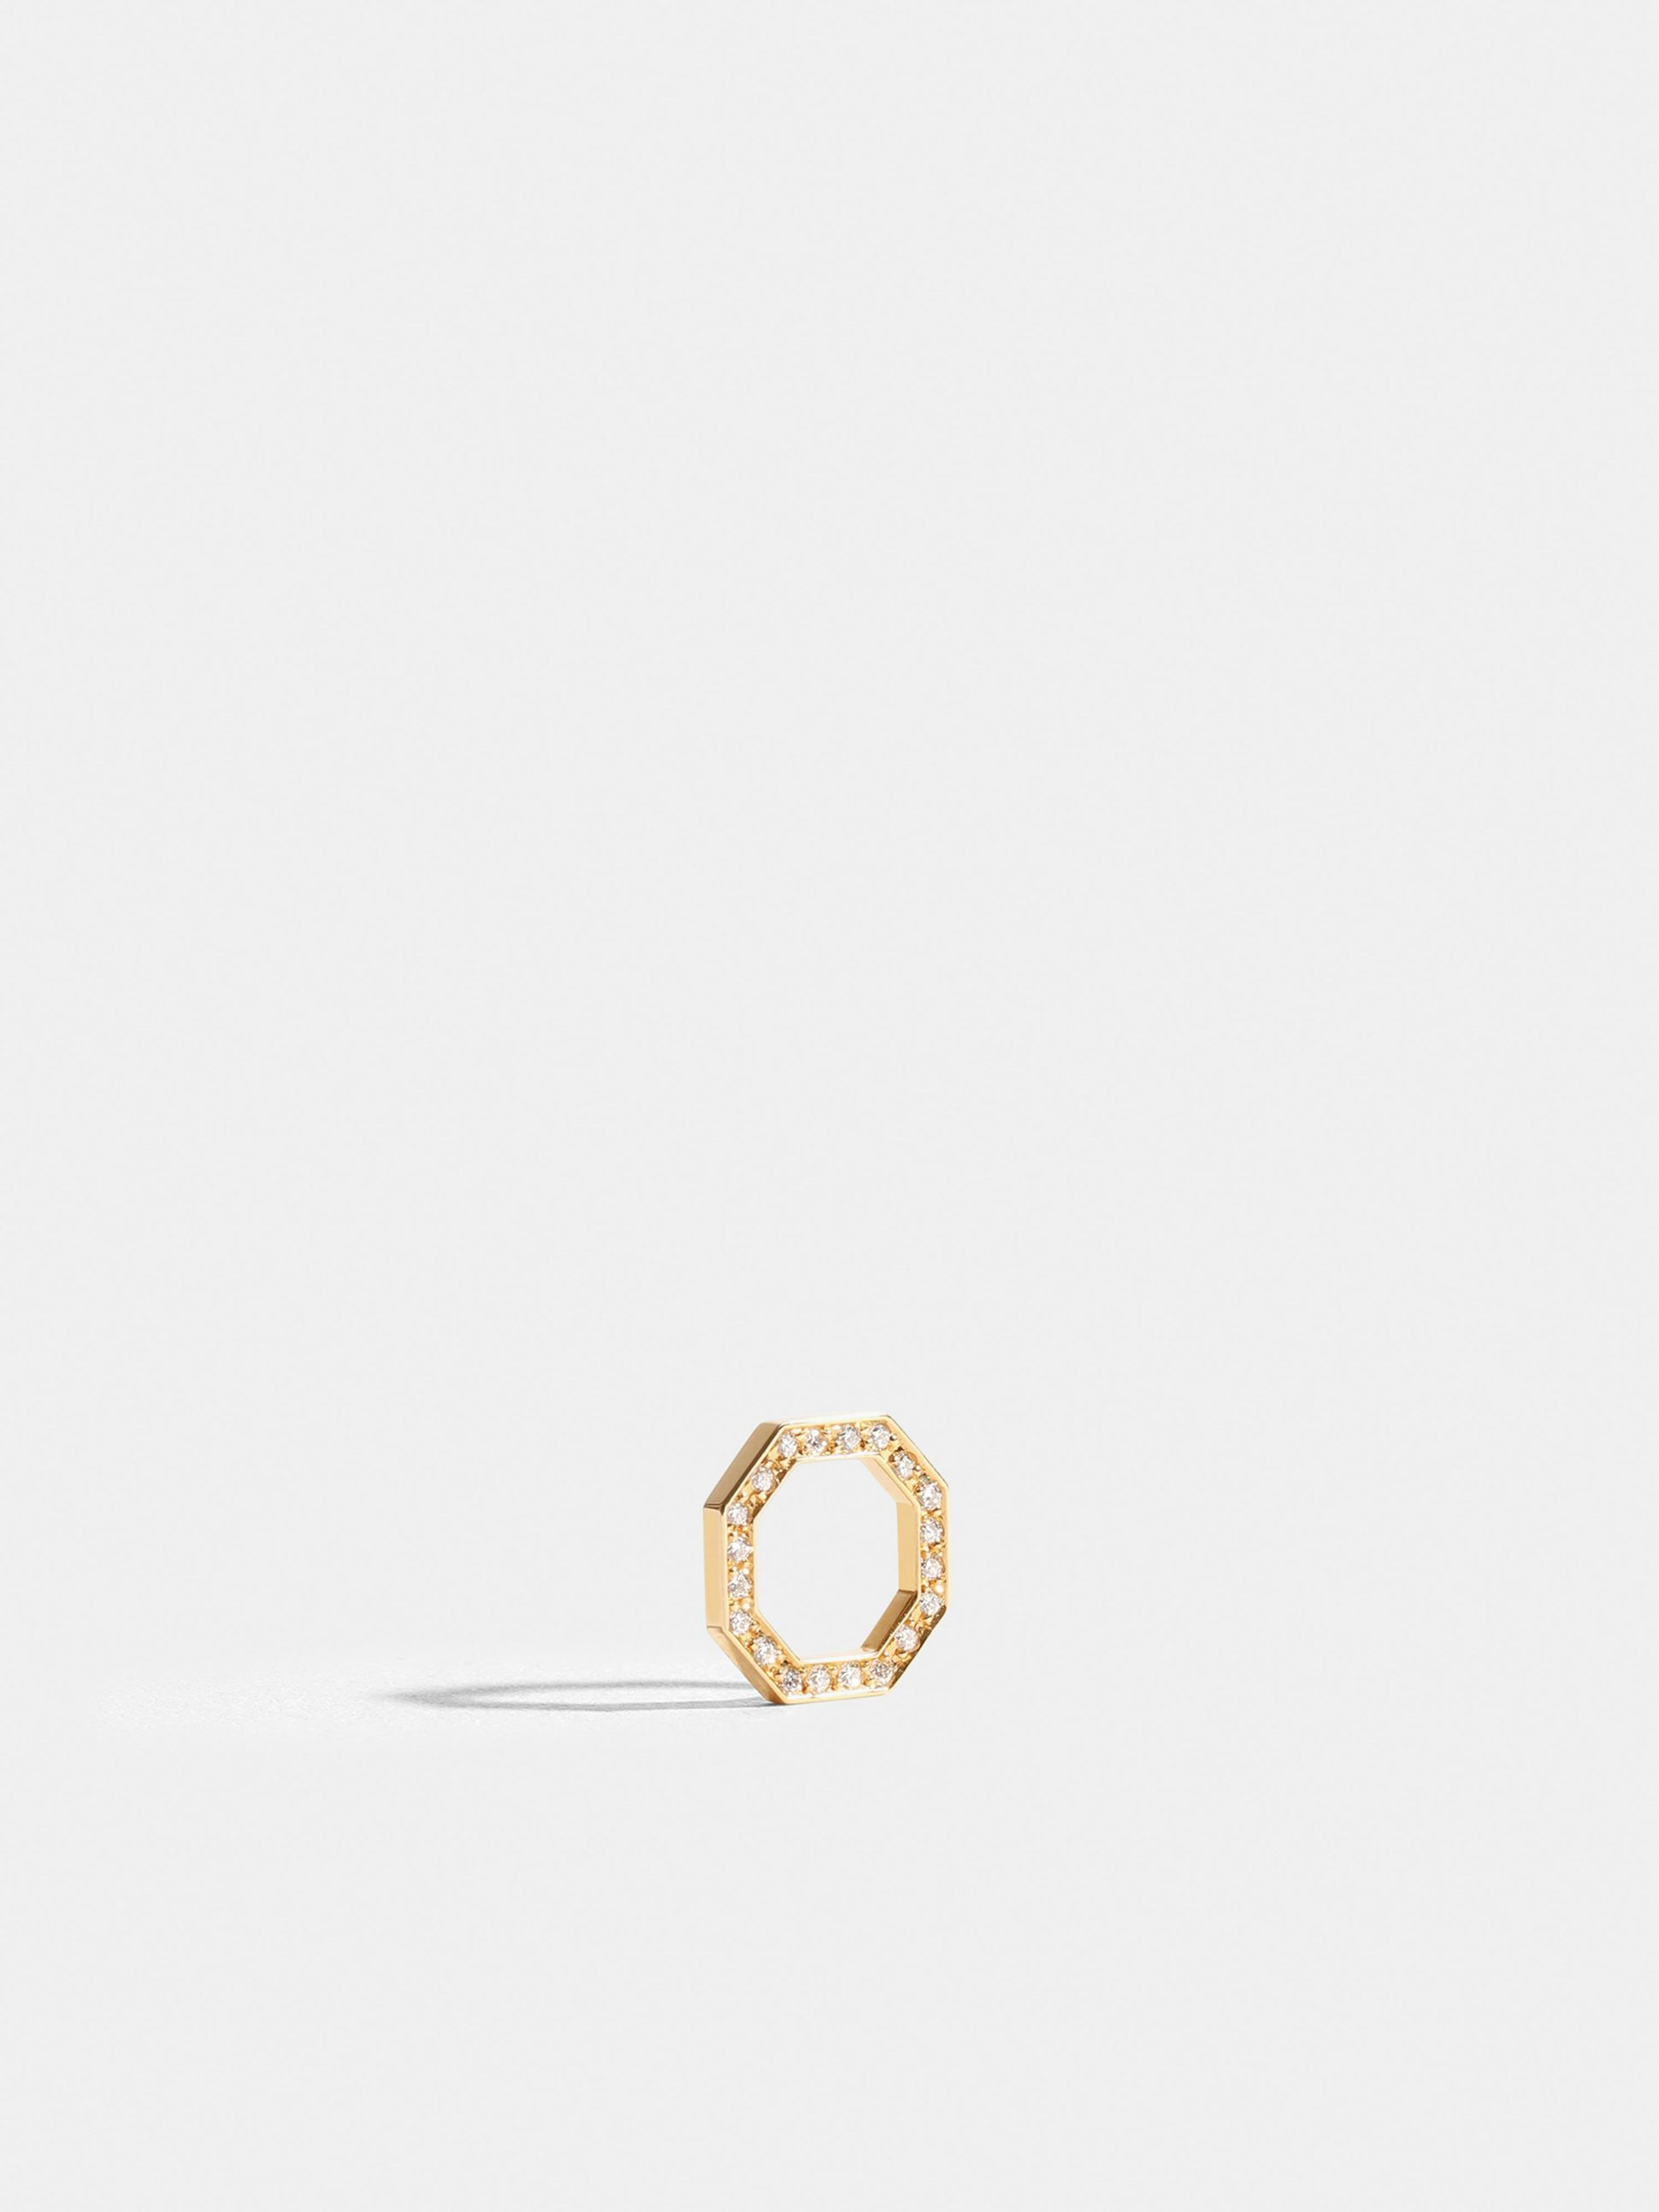 Octogone motif in 18k Fairmined ethical yellow gold, paved with lab-grown diamonds, on a cord.